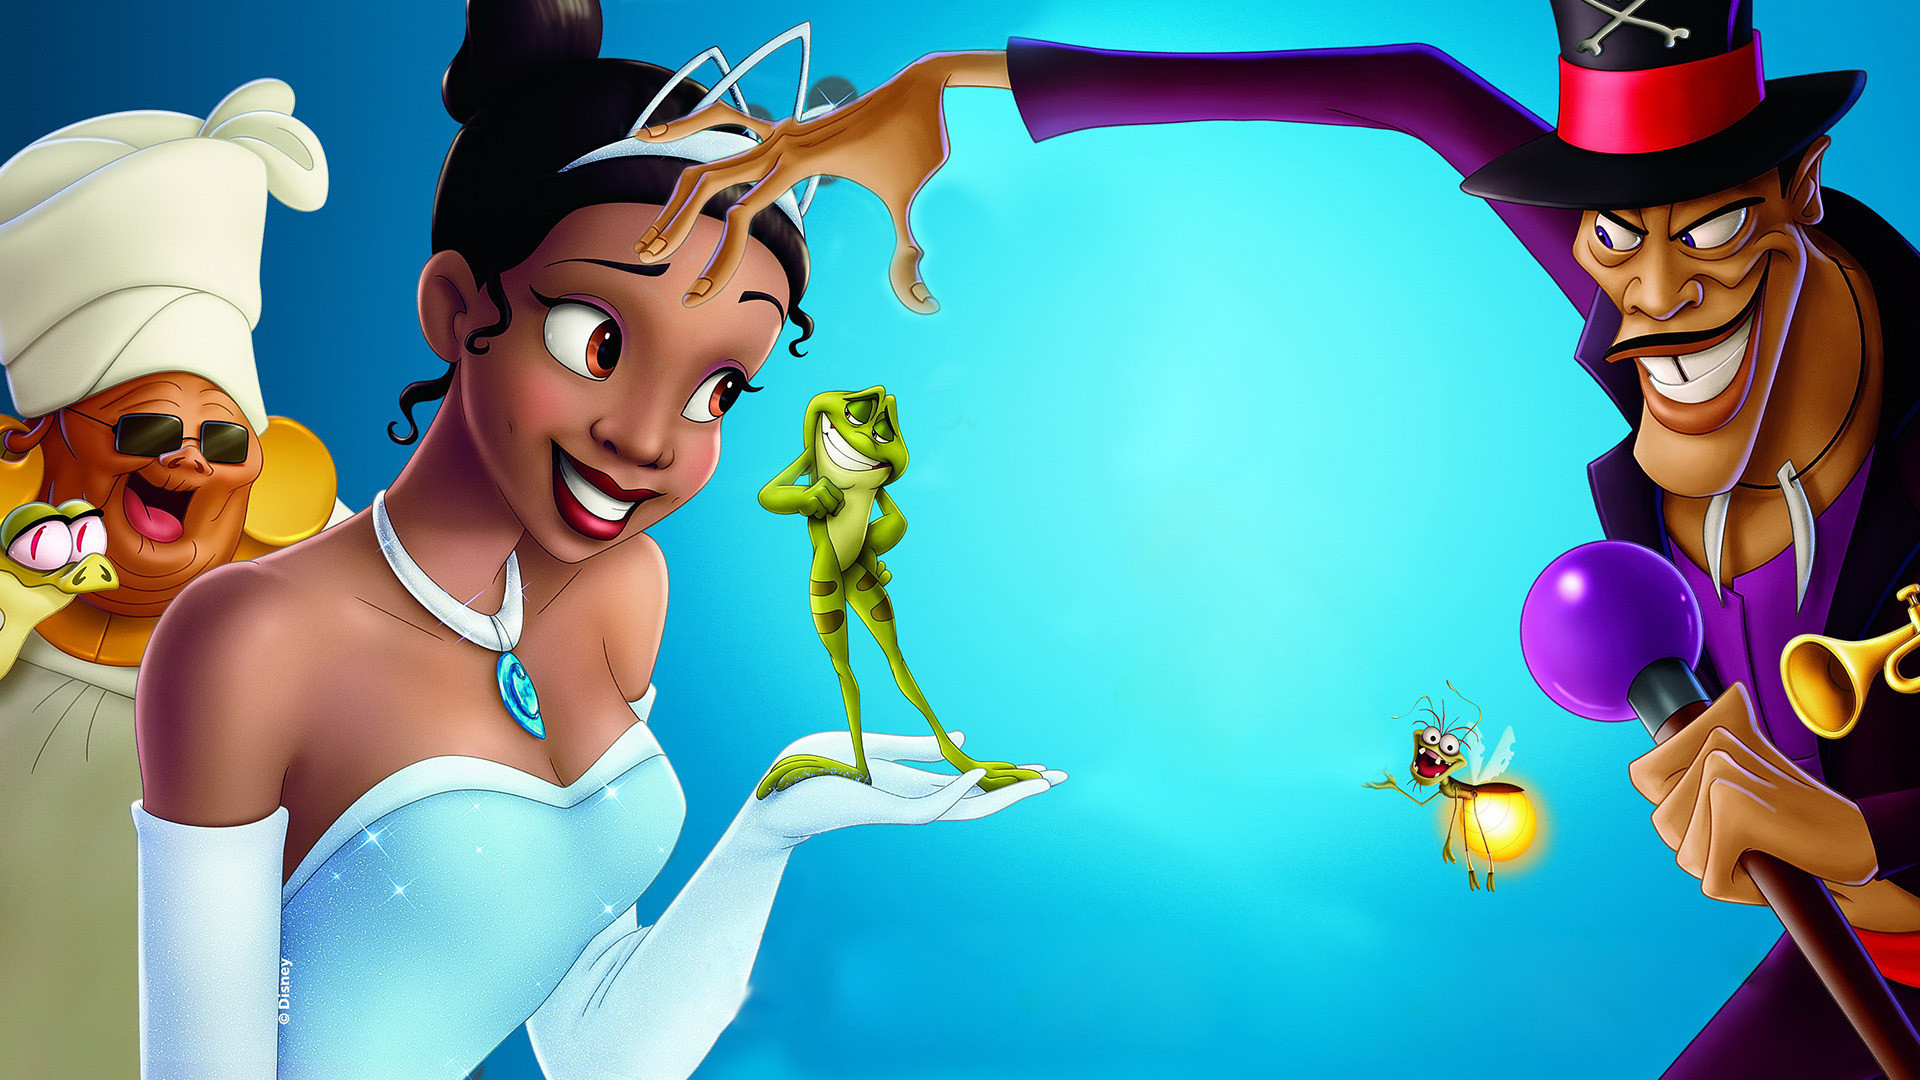 The Princess And The Frog HD wallpapers, Desktop wallpaper - most viewed